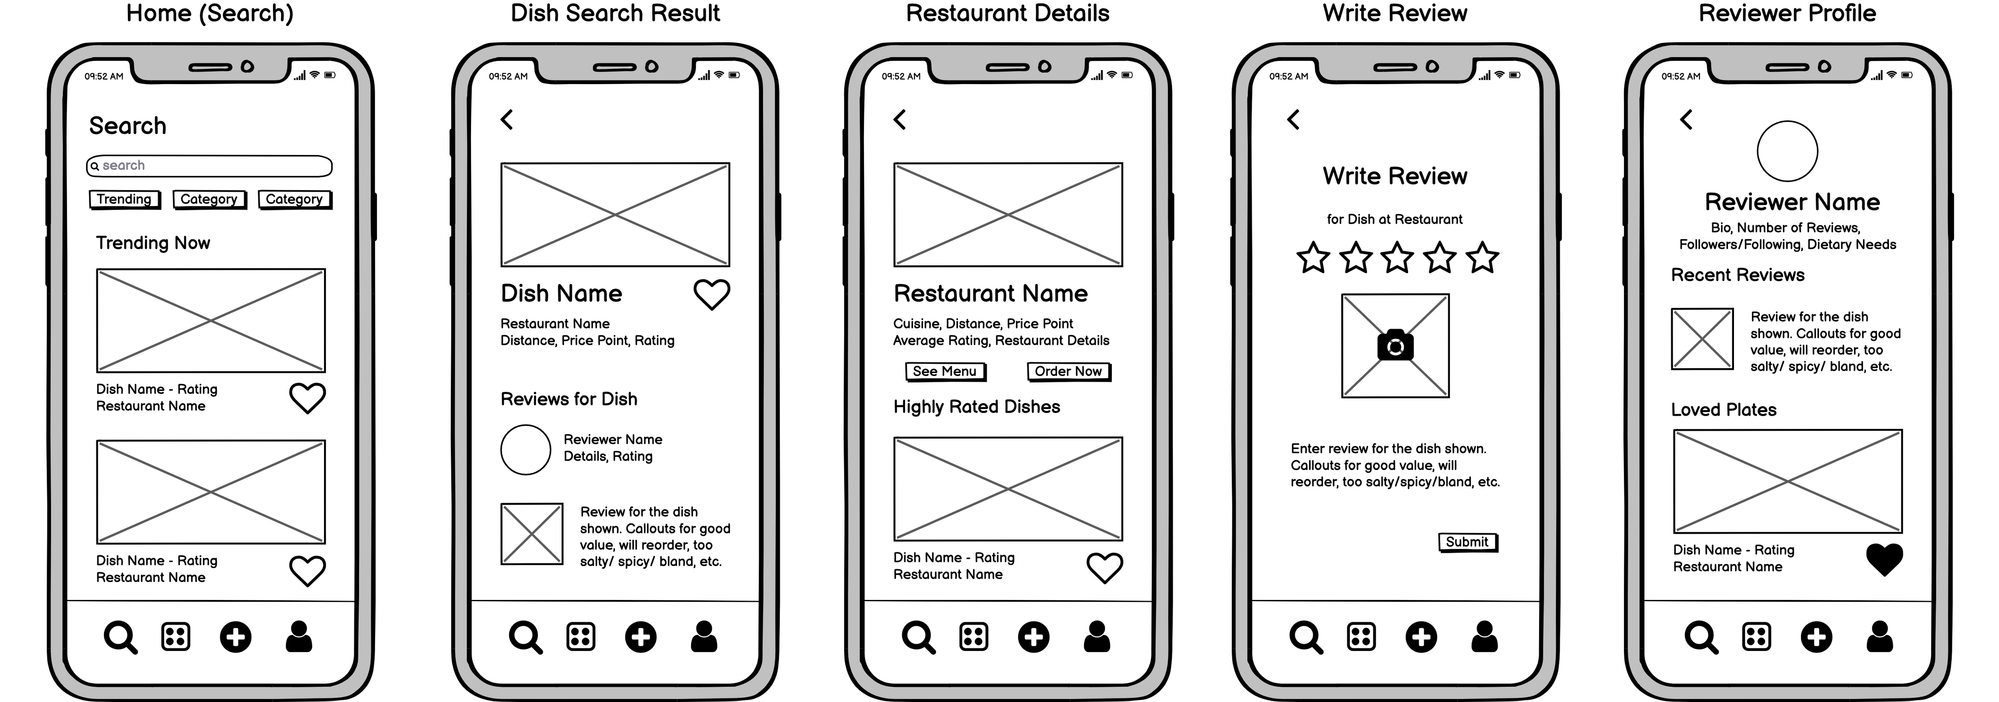 Low fidelity wireframe sketches for five screens: home(search), dish screen, result screen, writing a review and reviewer profile.